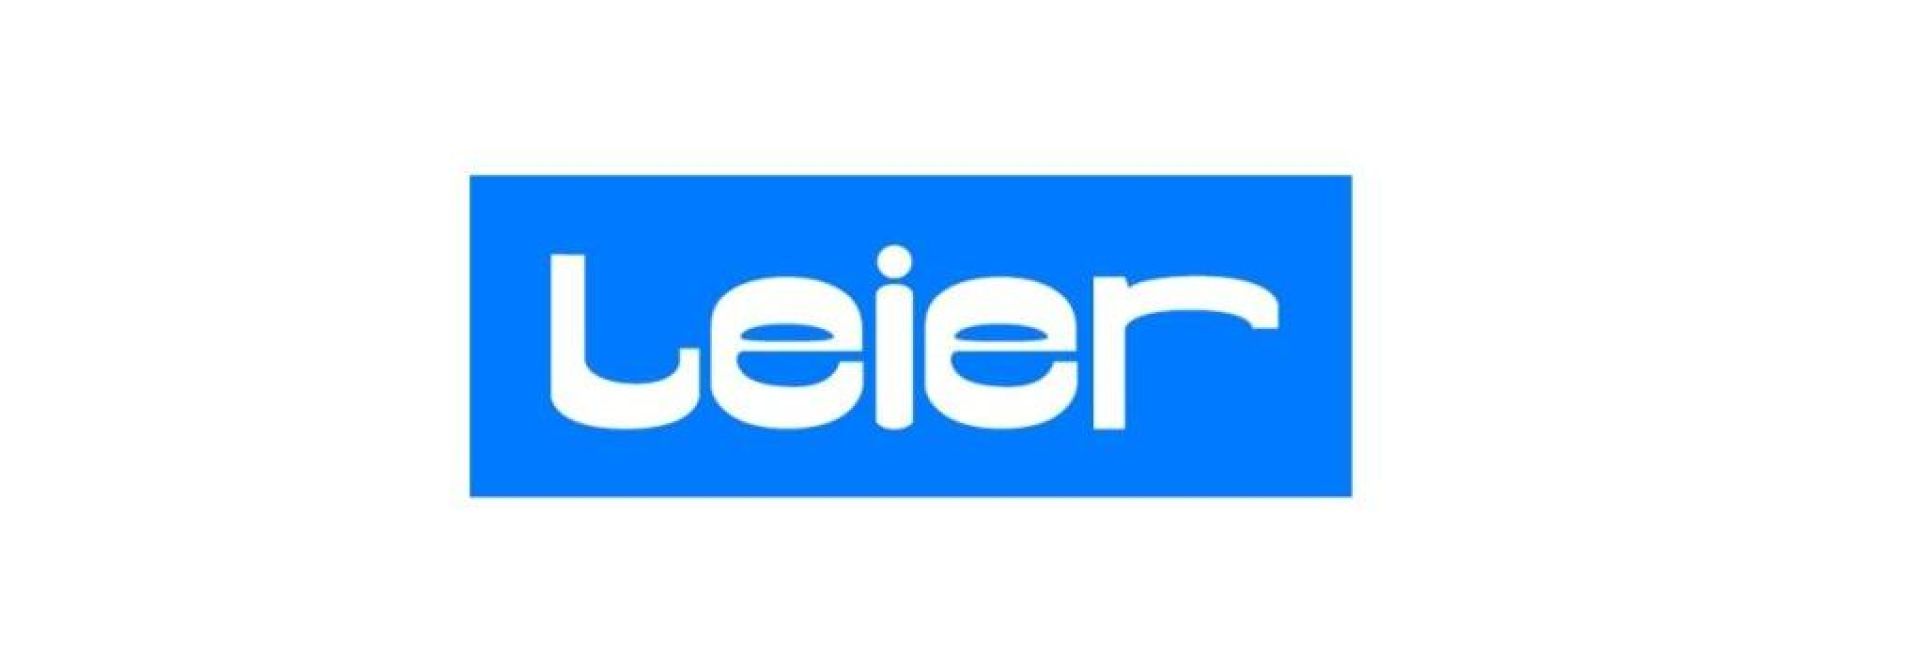 Leier implements capacity expanding investments in Hungary